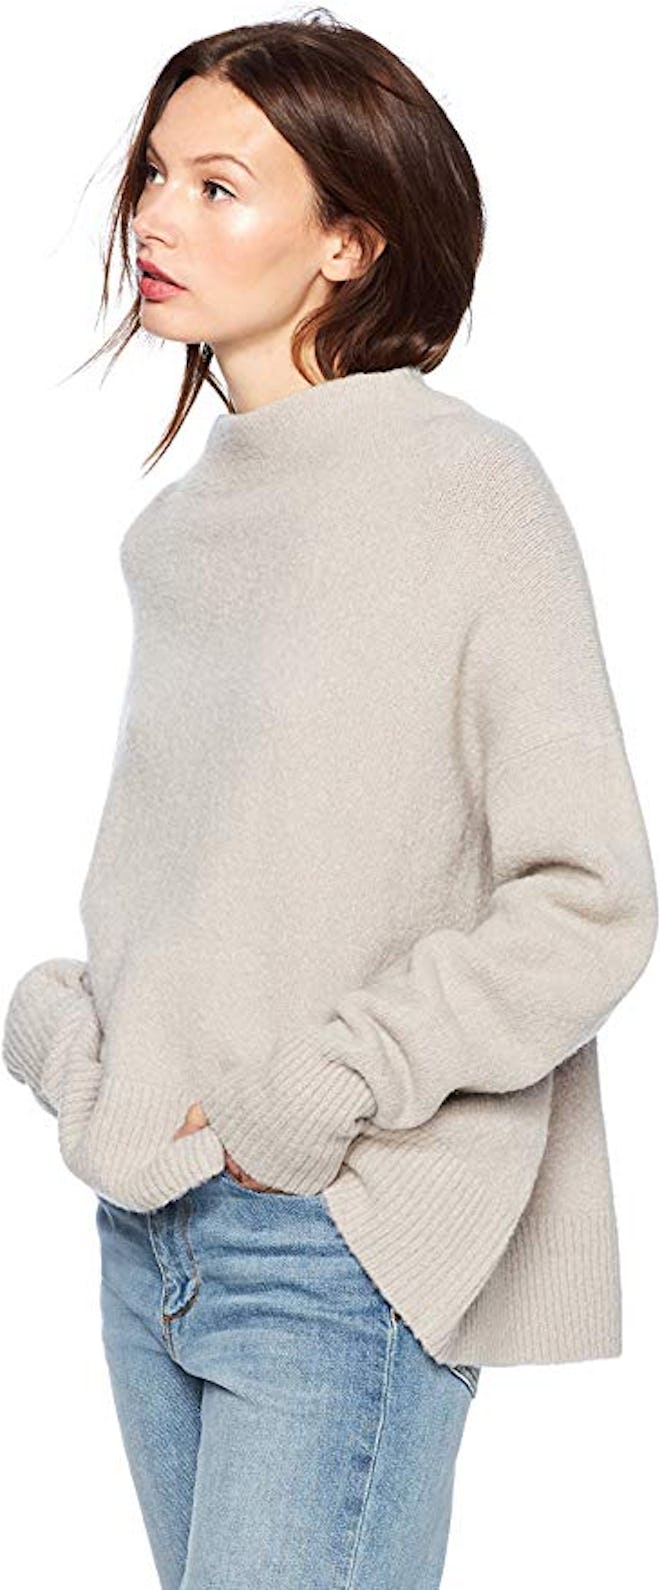 Cable Stitch Women's Mock Neck Cozy Sweater